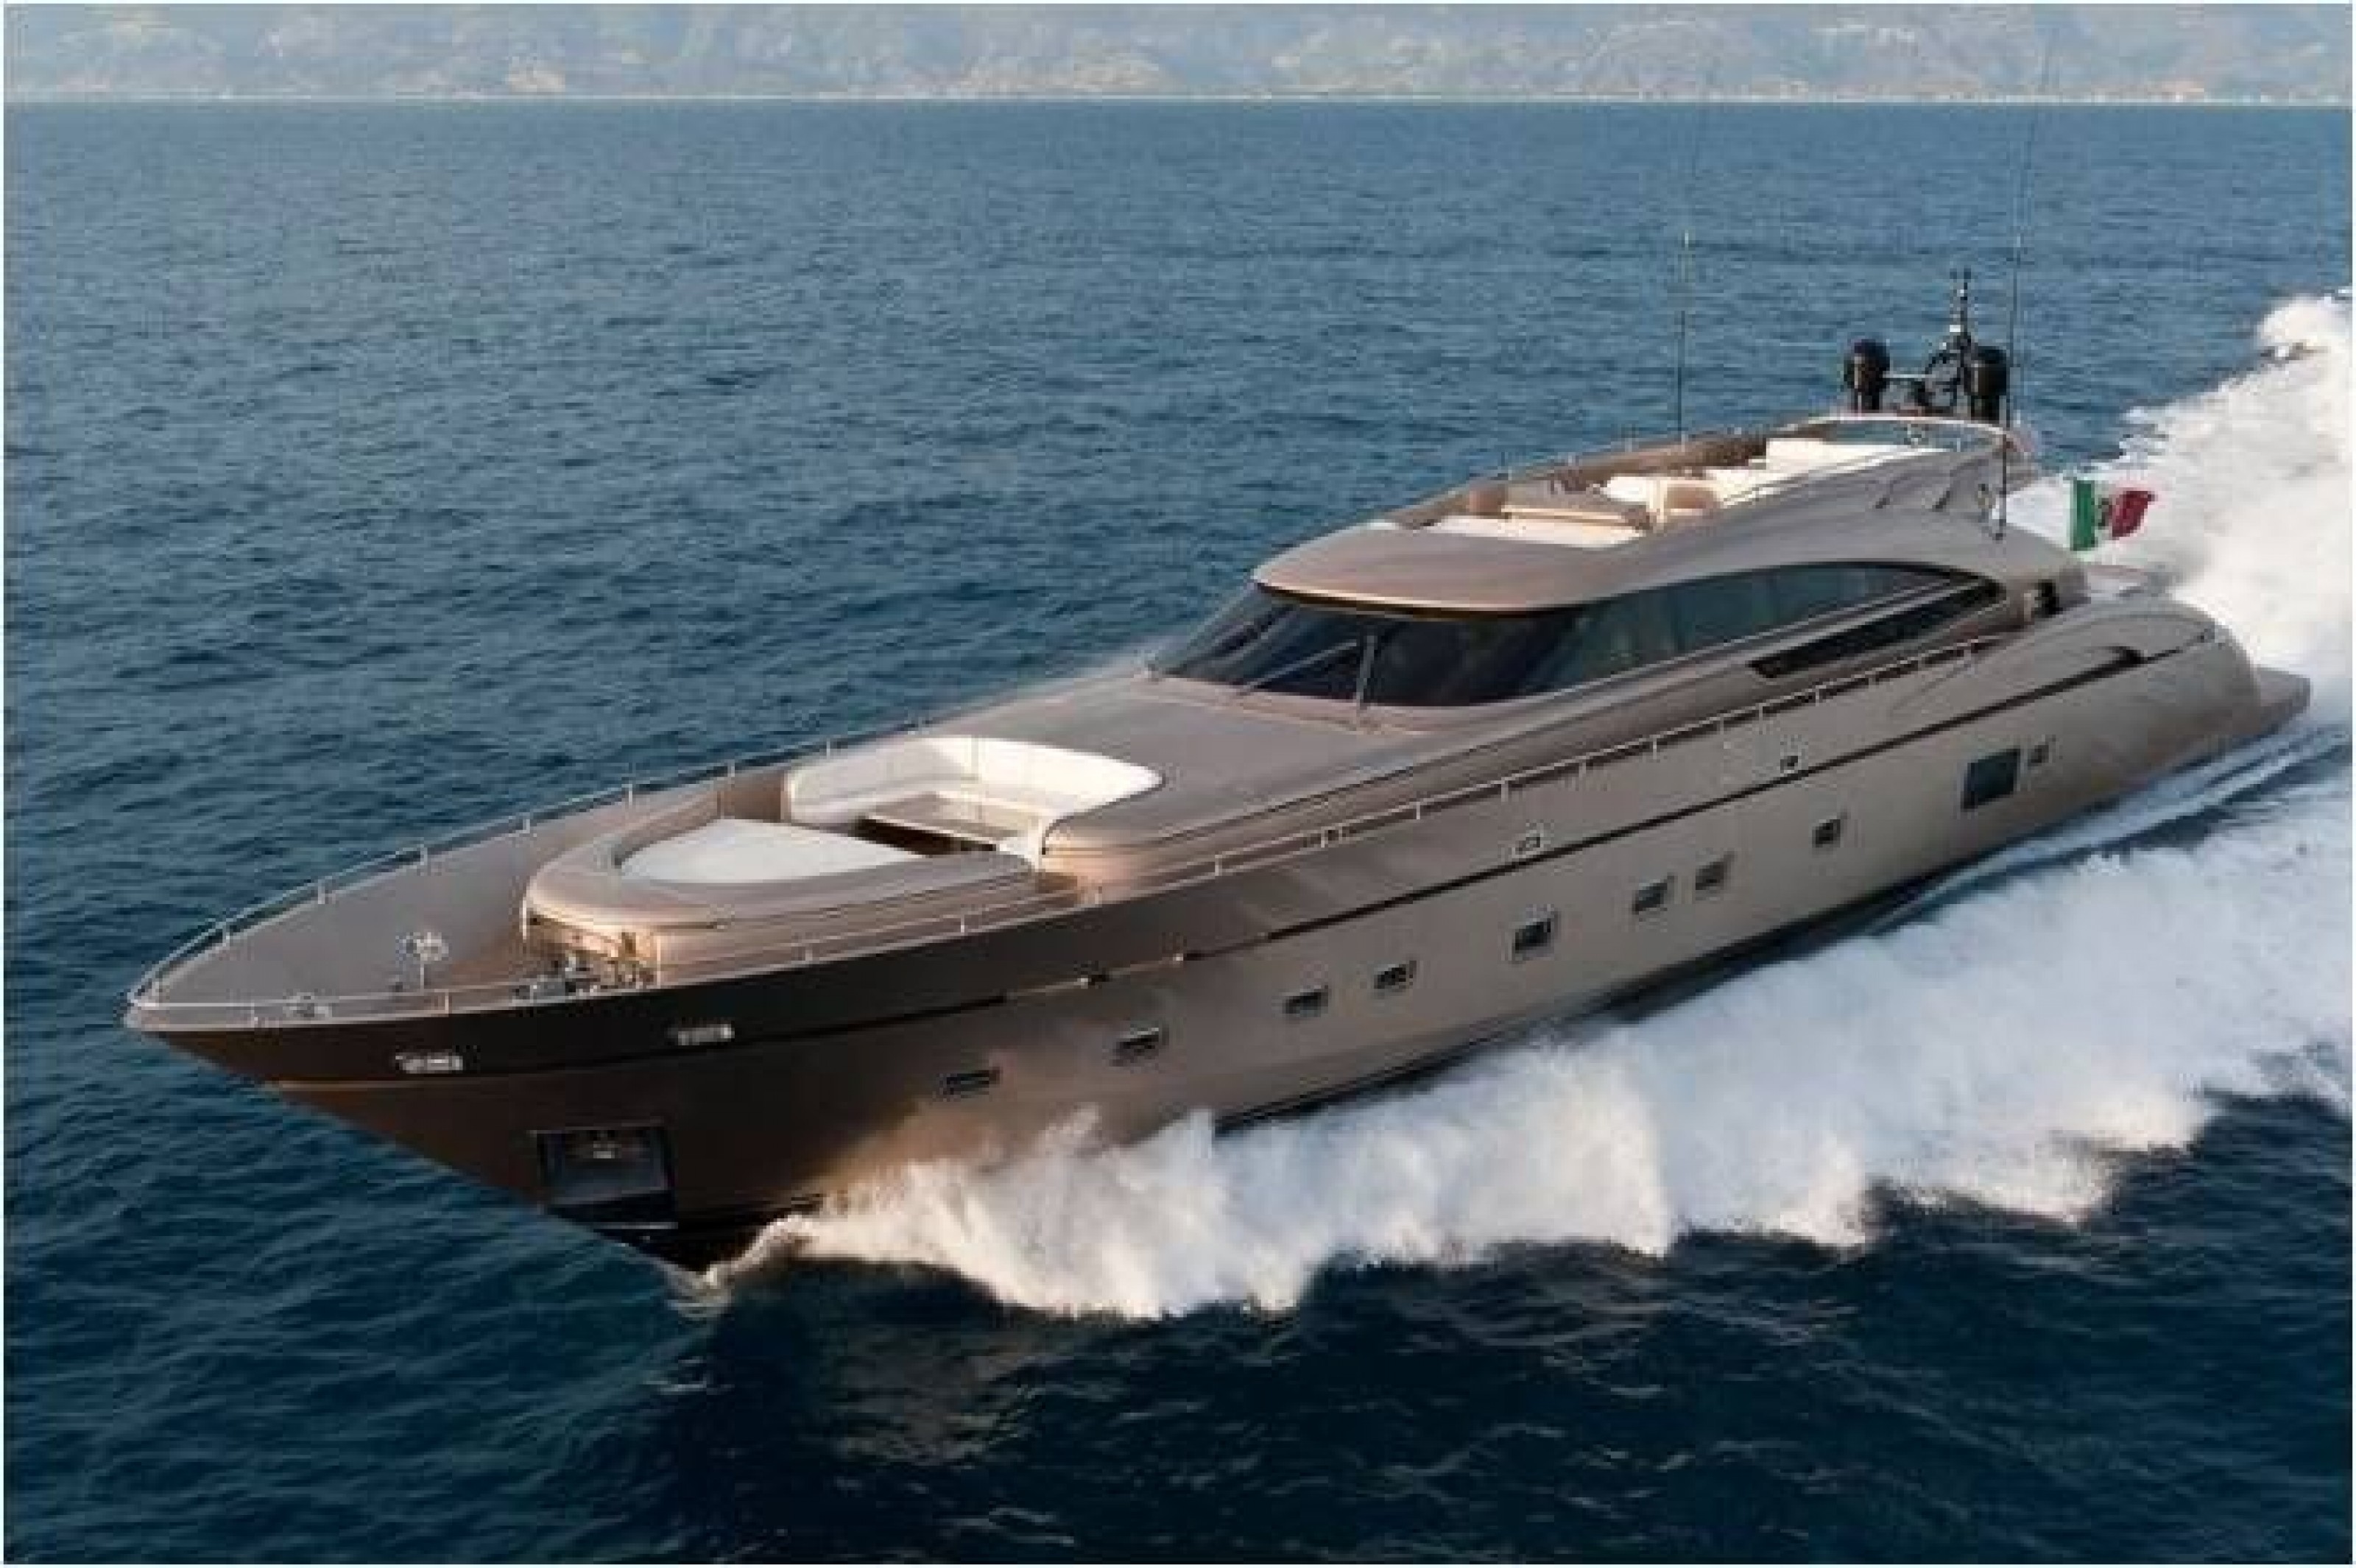 The New Generation Yachts